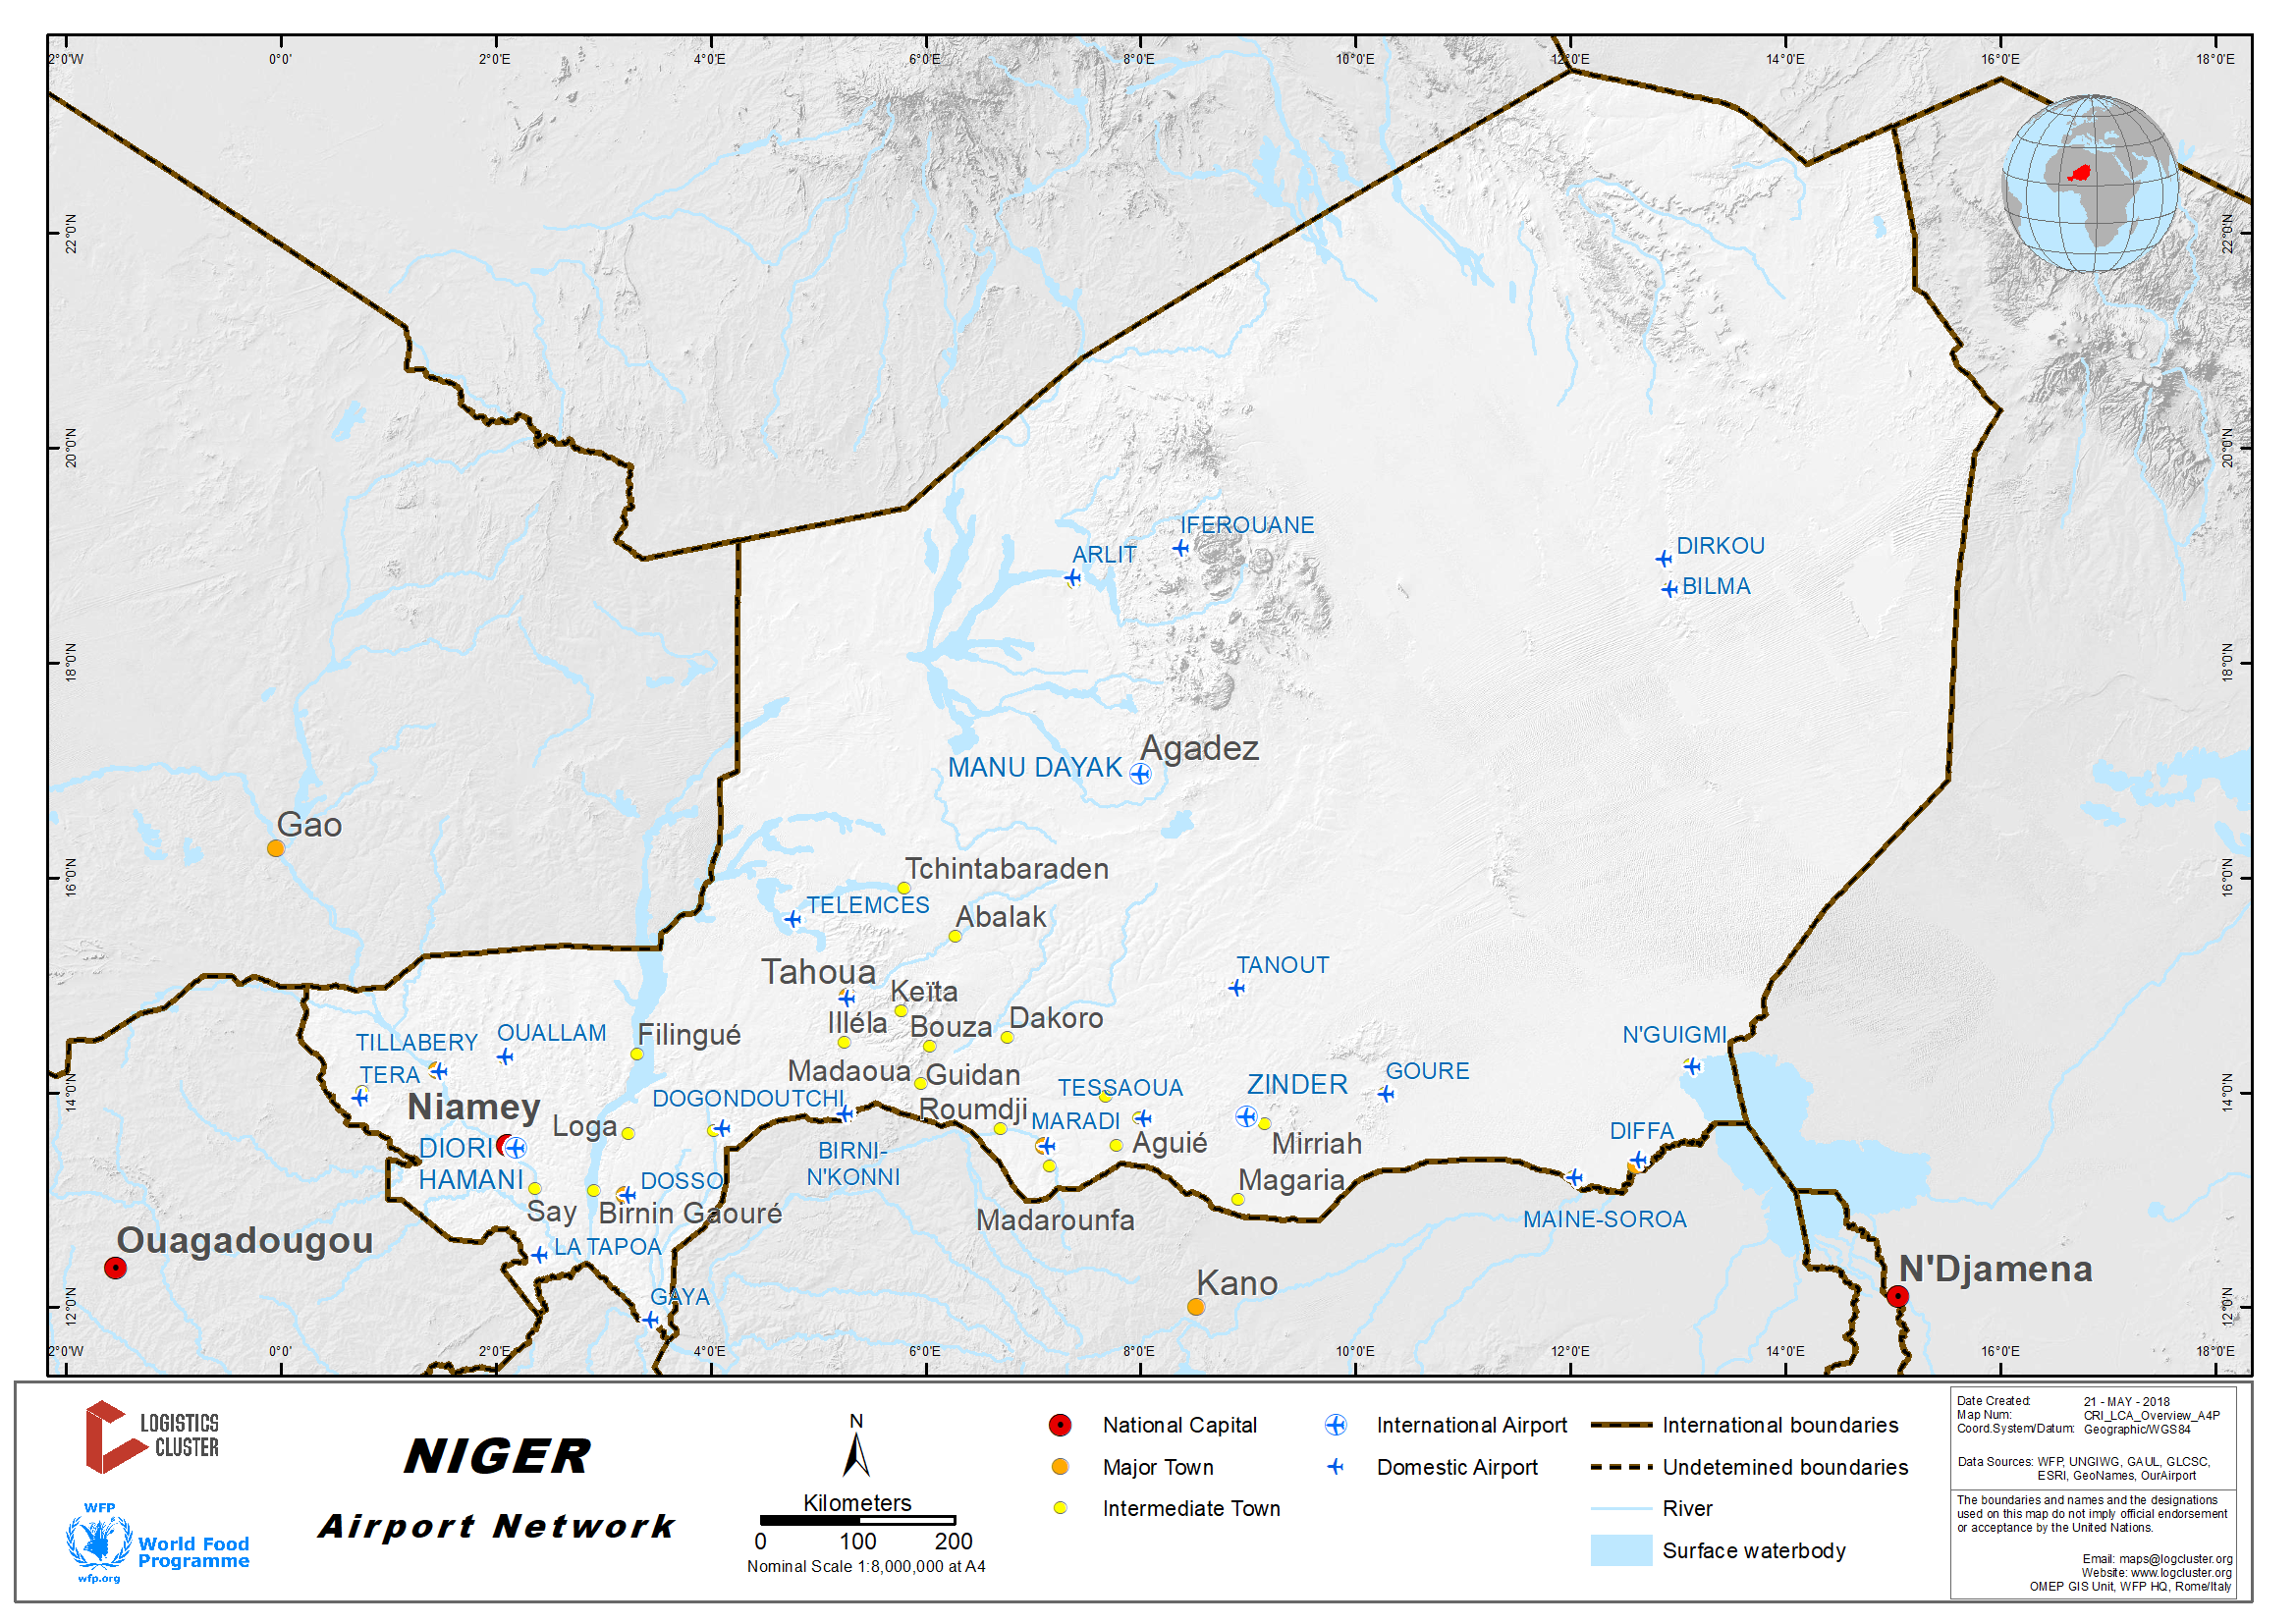 Niger Airport Network 